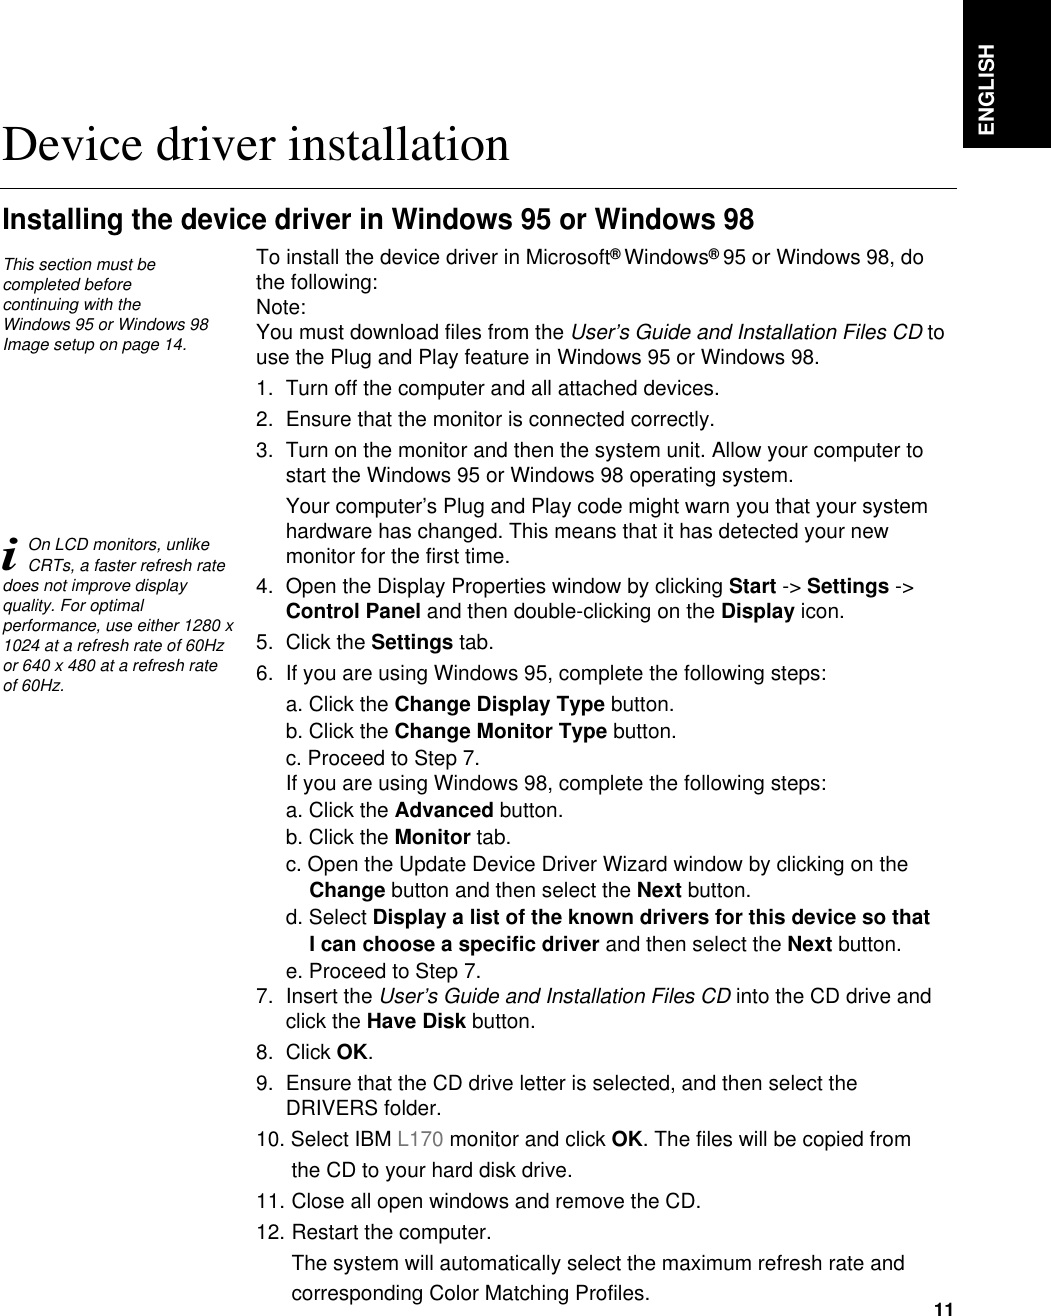 ENGLISH11To install the device driver in Microsoft®Windows®95 or Windows 98, dothe following: Note:You must download files from the User’s Guide and Installation Files CD touse the Plug and Play feature in Windows 95 or Windows 98.1. Turn off the computer and all attached devices.2. Ensure that the monitor is connected correctly.3. Turn on the monitor and then the system unit. Allow your computer tostart the Windows 95 or Windows 98 operating system.Your computer’s Plug and Play code might warn you that your systemhardware has changed. This means that it has detected your newmonitor for the first time.4. Open the Display Properties window by clicking Start -&gt; Settings -&gt;Control Panel and then double-clicking on the Display icon.5. Click the Settings tab.6. If you are using Windows 95, complete the following steps: a. Click the Change Display Type button.b. Click the Change Monitor Type button.c. Proceed to Step 7.If you are using Windows 98, complete the following steps: a. Click the Advanced button.b. Click the Monitor tab.c. Open the Update Device Driver Wizard window by clicking on theChange button and then select the Next button.d. Select Display a list of the known drivers for this device so that I can choose a specific driver and then select the Next button. e. Proceed to Step 7.7. Insert the User’s Guide and Installation Files CD into the CD drive andclick the Have Disk button.8. Click OK.9. Ensure that the CD drive letter is selected, and then select theDRIVERS folder.10. Select IBM L170 monitor and click OK. The files will be copied from the CD to your hard disk drive.11. Close all open windows and remove the CD.12. Restart the computer.The system will automatically select the maximum refresh rate and corresponding Color Matching Profiles. Device driver installationInstalling the device driver in Windows 95 or Windows 98This section must becompleted before continuing with the Windows 95 or Windows 98Image setup on page 14.iOn LCD monitors, unlikeCRTs, a faster refresh ratedoes not improve displayquality. For optimalperformance, use either 1280 x1024 at a refresh rate of 60Hzor 640 x 480 at a refresh rateof 60Hz.